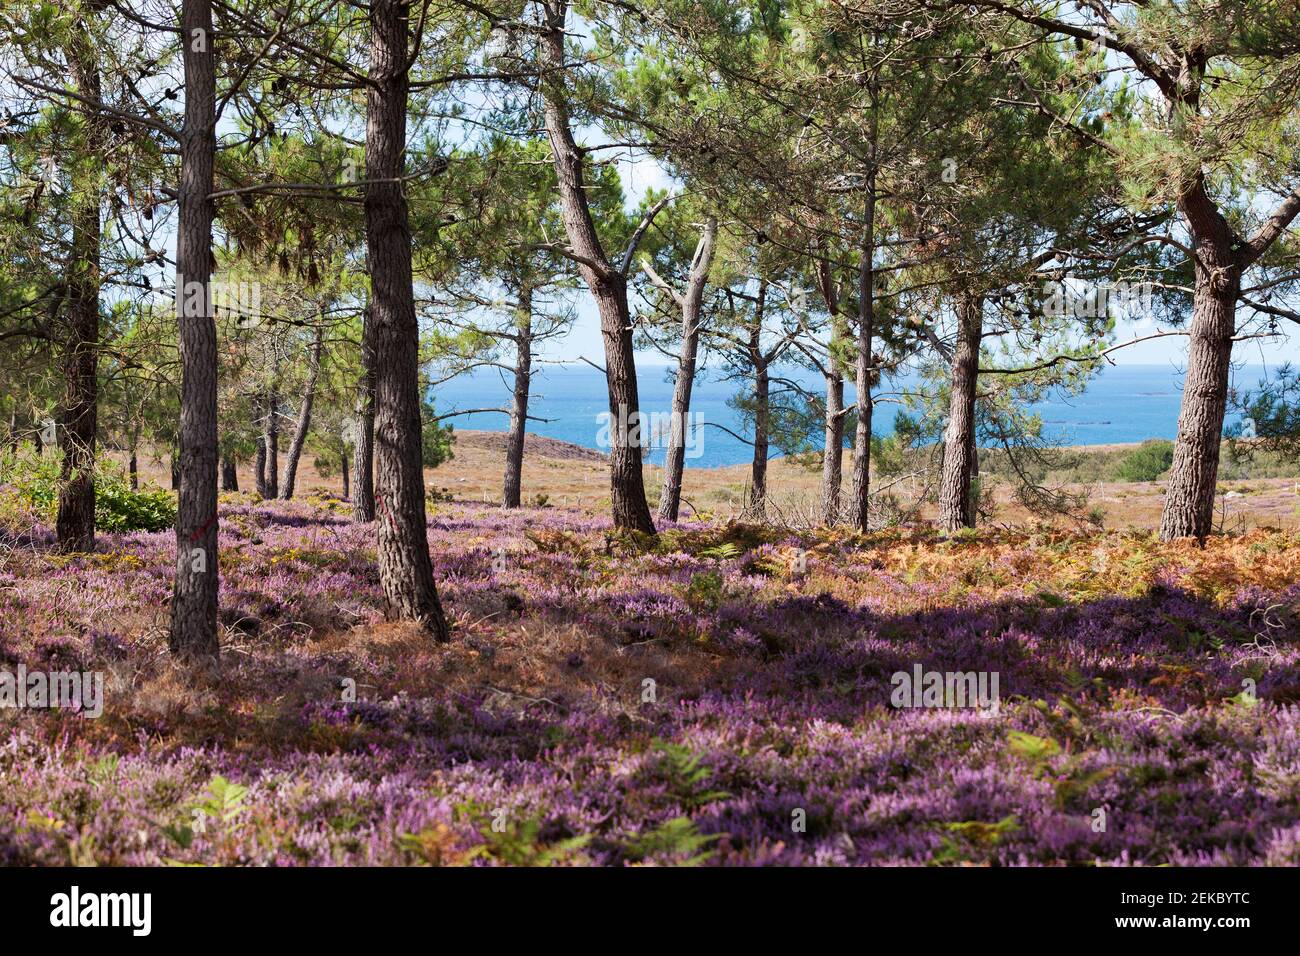 Cap Erquy, Brittany, Heath and pine trees in summer. Pine forest by the sea. France. Stock Photo